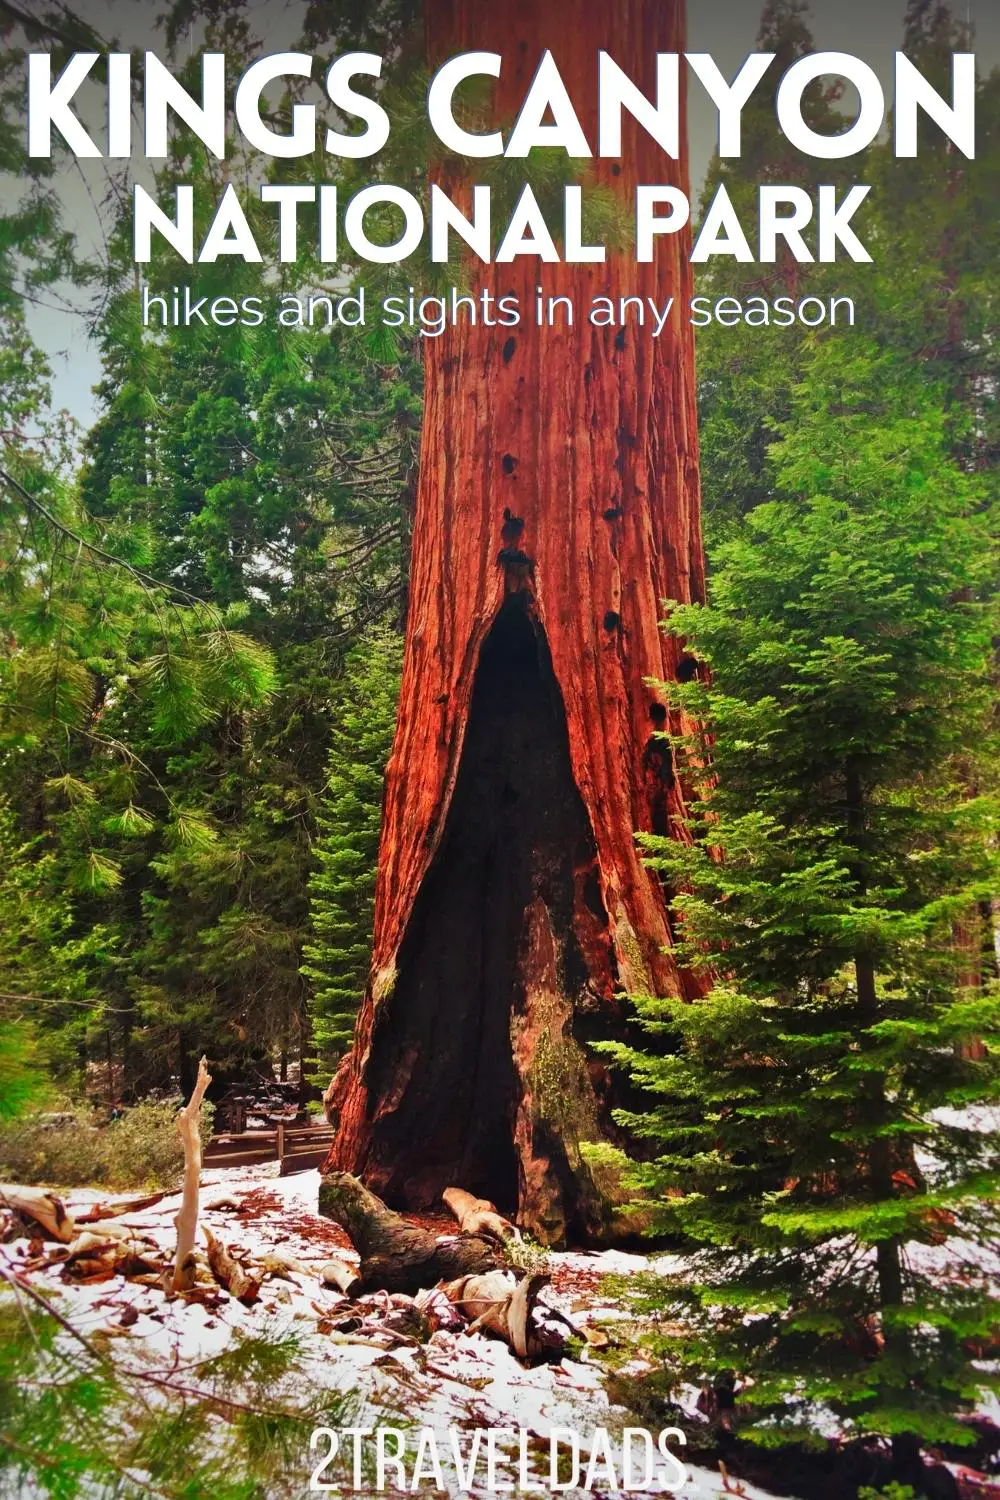 Kings Canyon National Park is beautiful and full of epic trees and view. Visiting Kings Canyon in any season is fun and interesting, but beware of snowy days. Tips and tricks for hiking at Kings Canyon and where to stay (National Park lodge!).